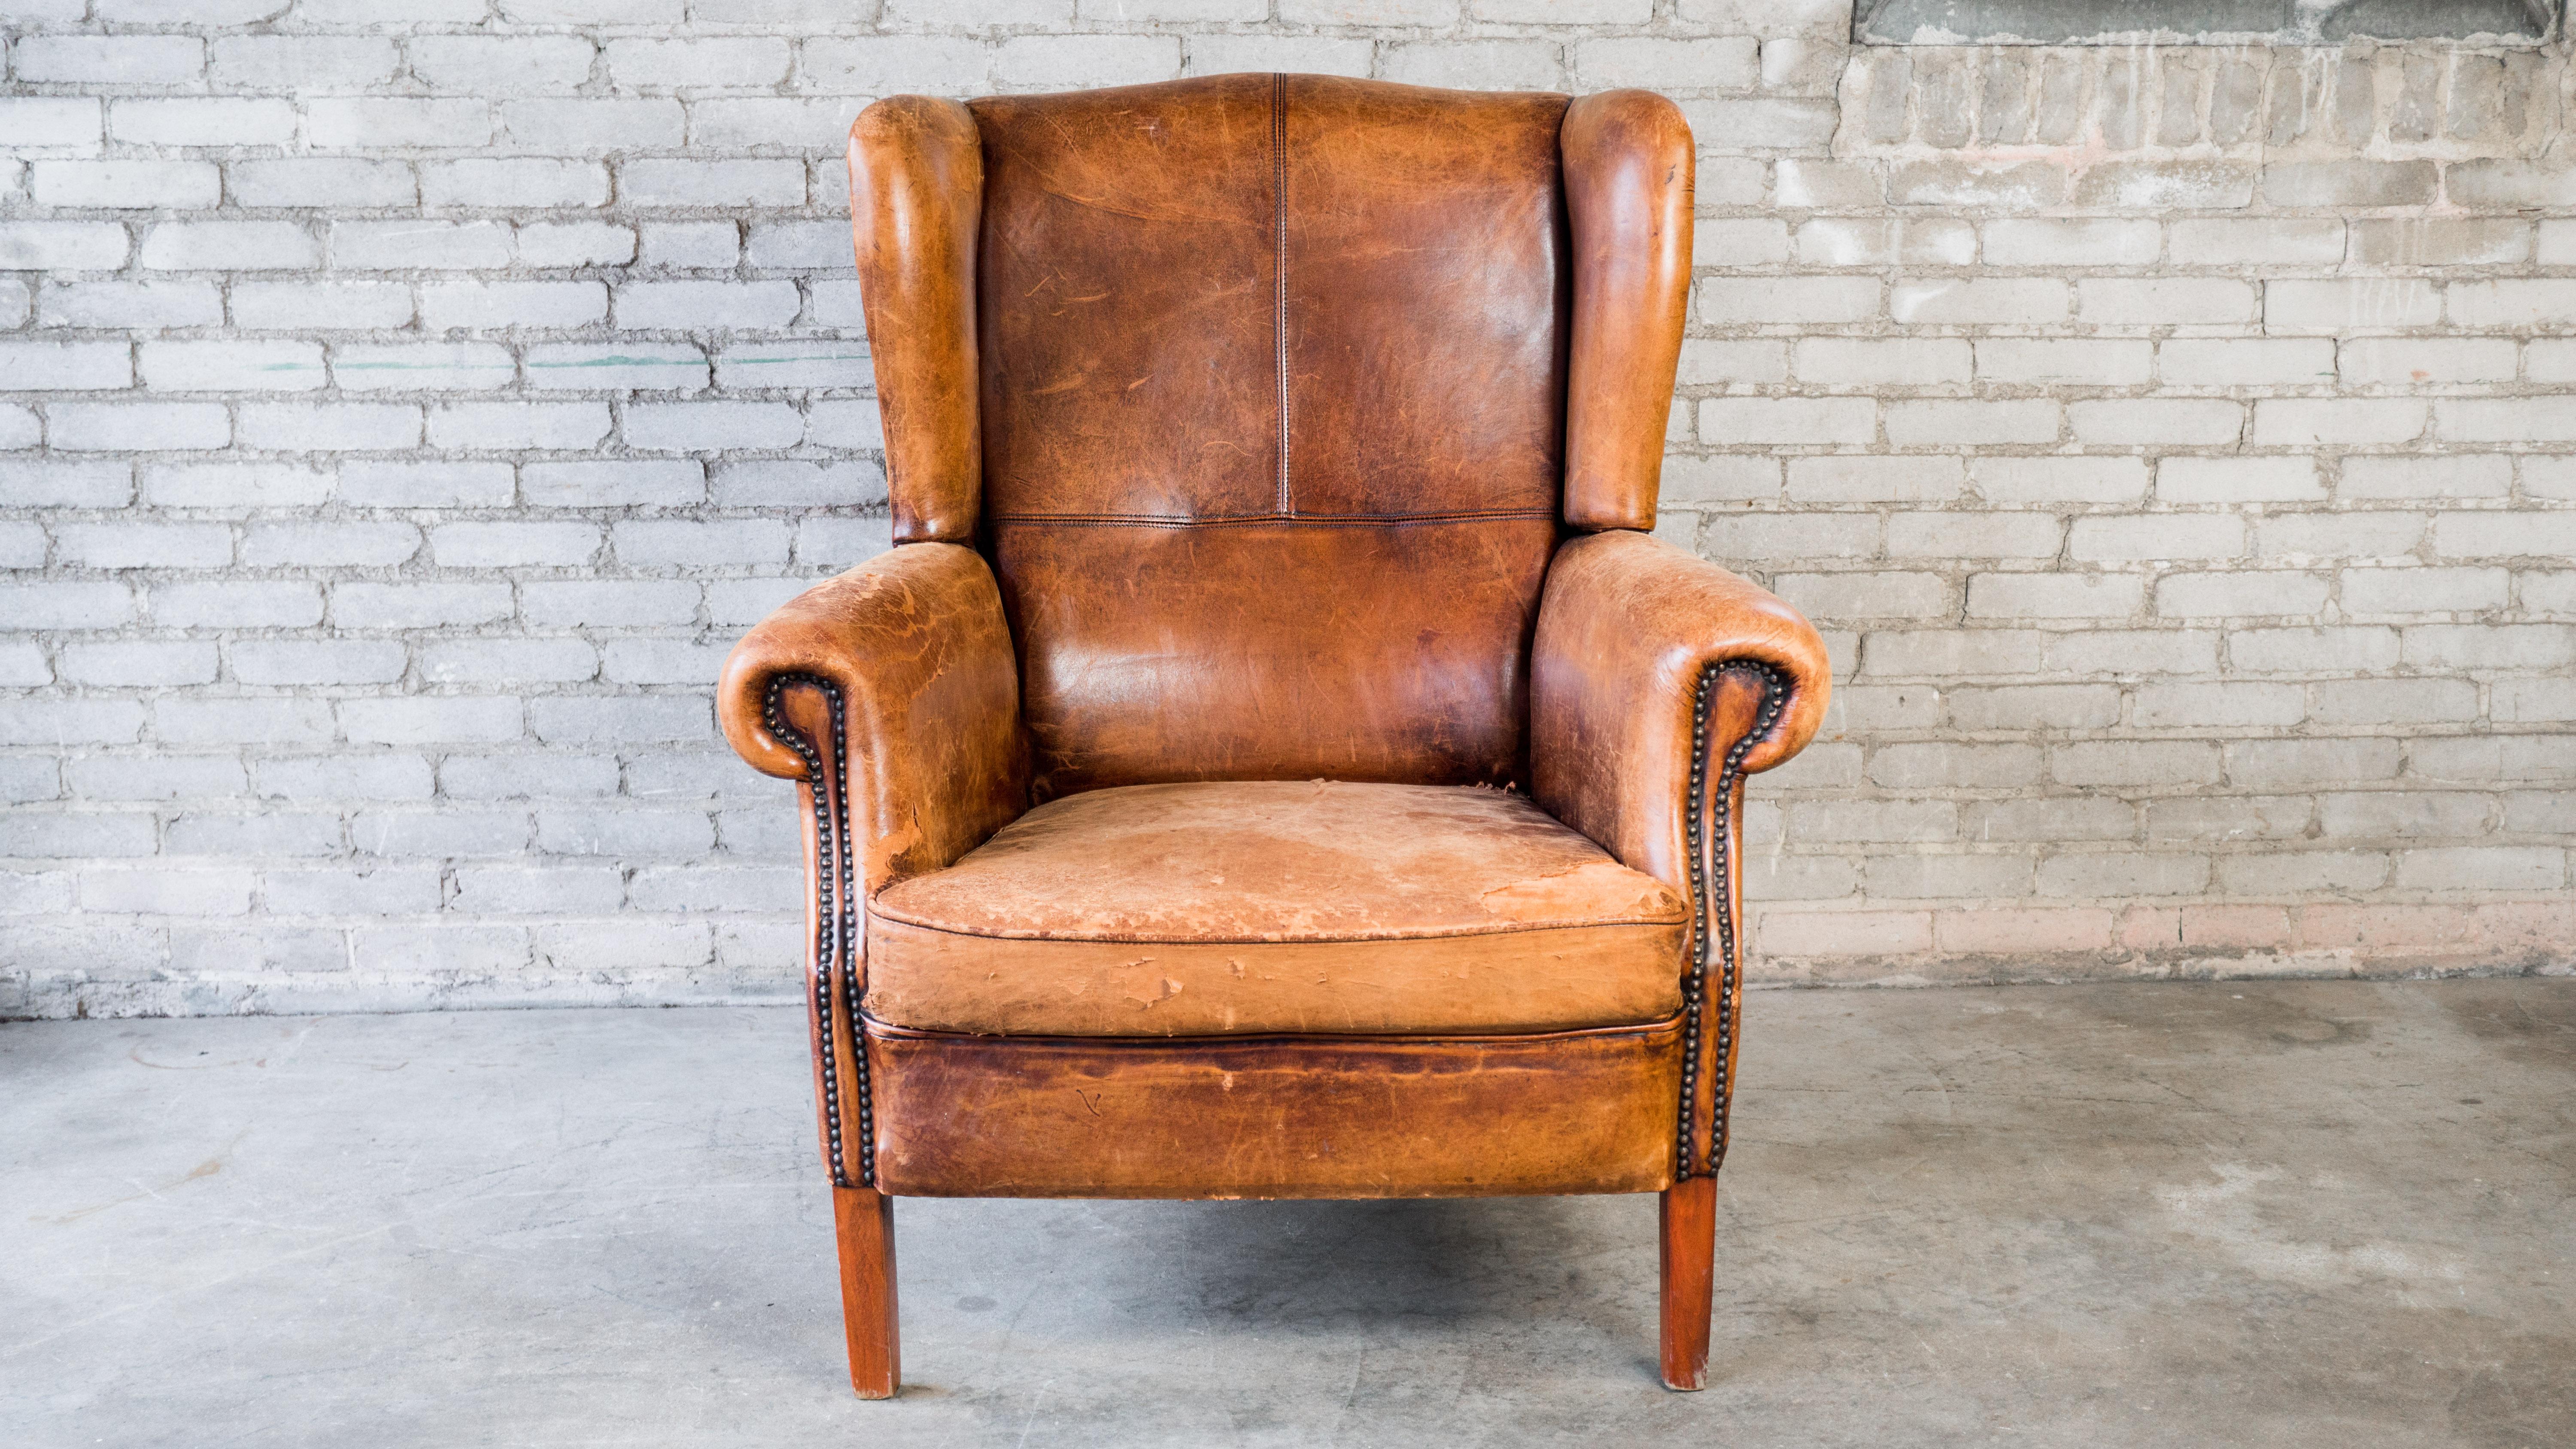 Vintage Art Deco leather wingback chair, circa 1970s. Beautifully distressed cigar brown leather with aged patina. European traditional wingback design with exposed stitching details and brass nailhead trim. Supported by wooden legs. Good vintage